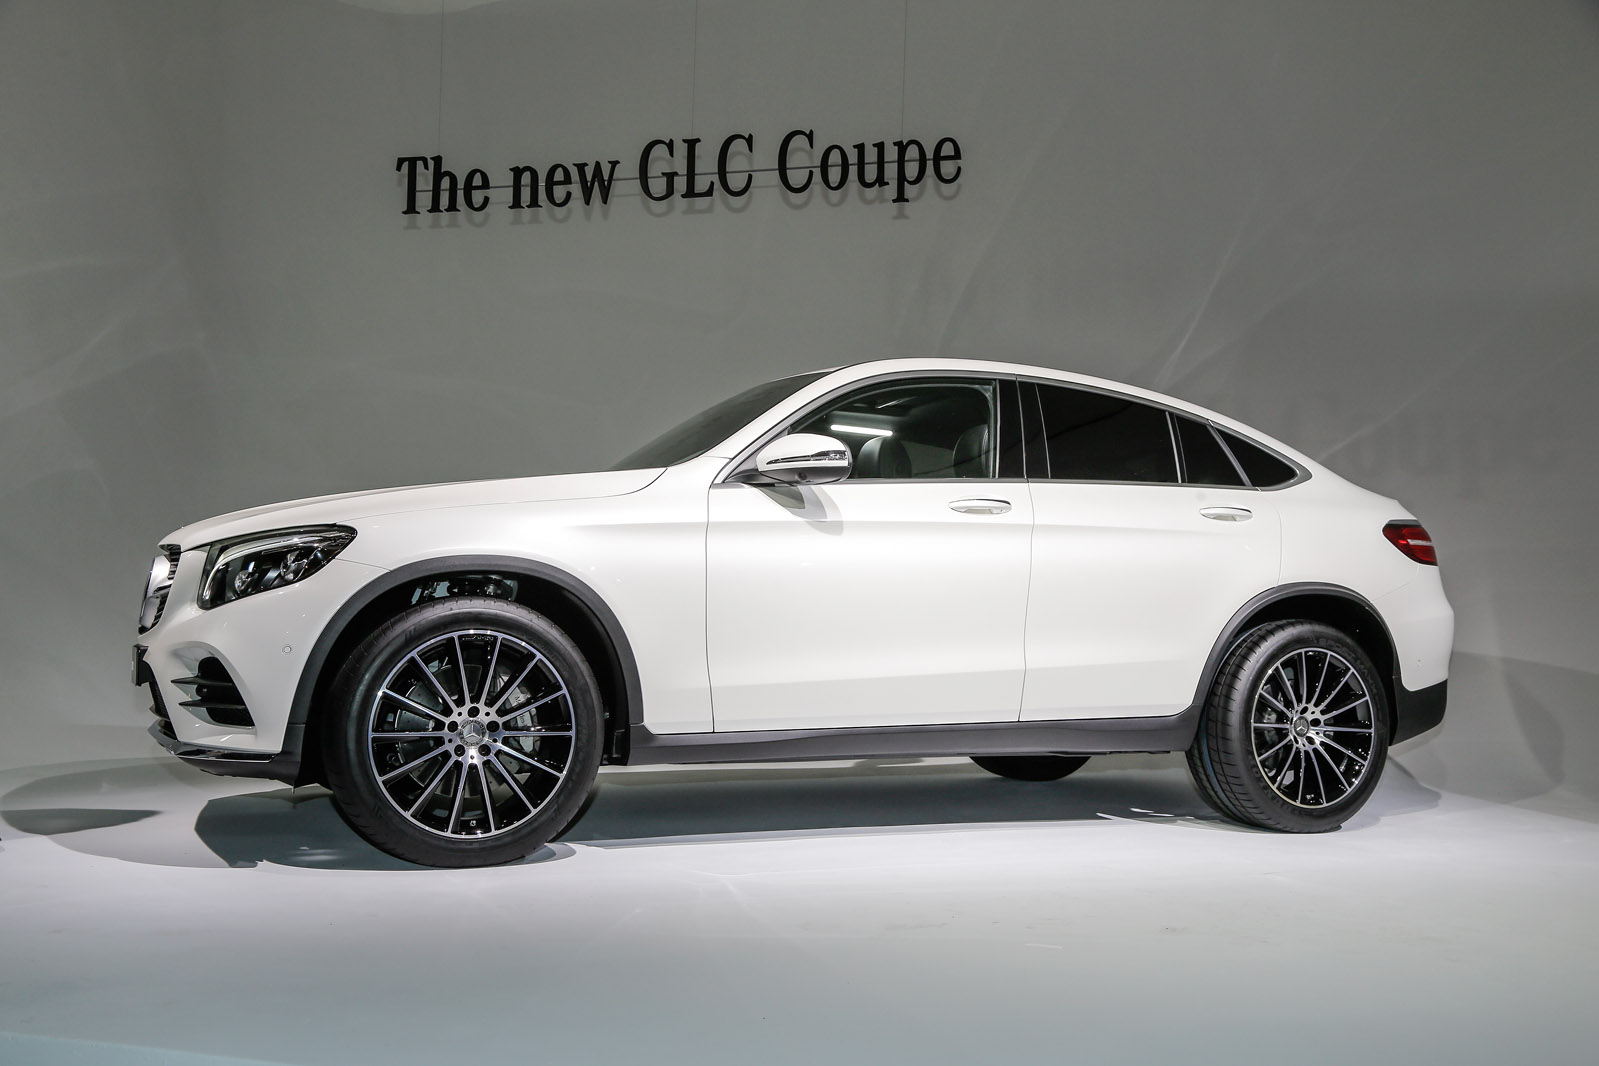 Mercedes Benz Glc Coupe Pricing And Specs Announced Autocar